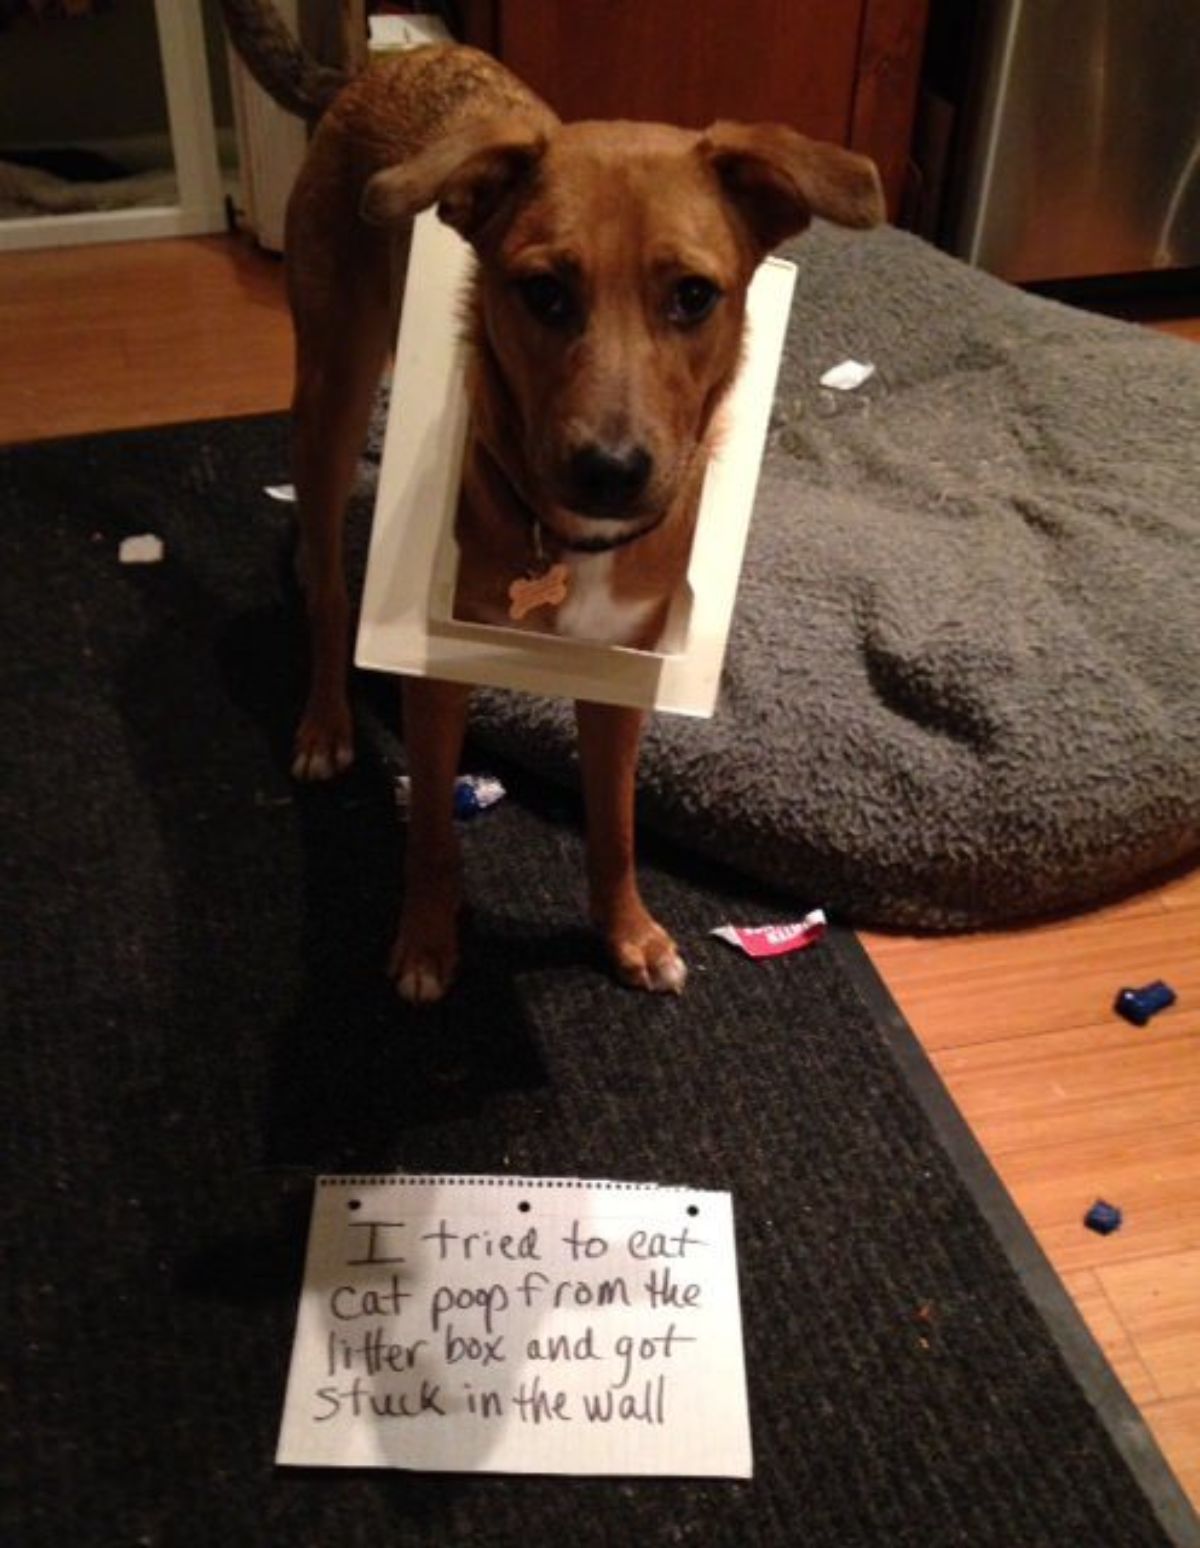 brown and white dog standing on brown carpet with the head stuck through a white kitty door and a note on the floor saying the dog tried to eat cat poop and got stuck